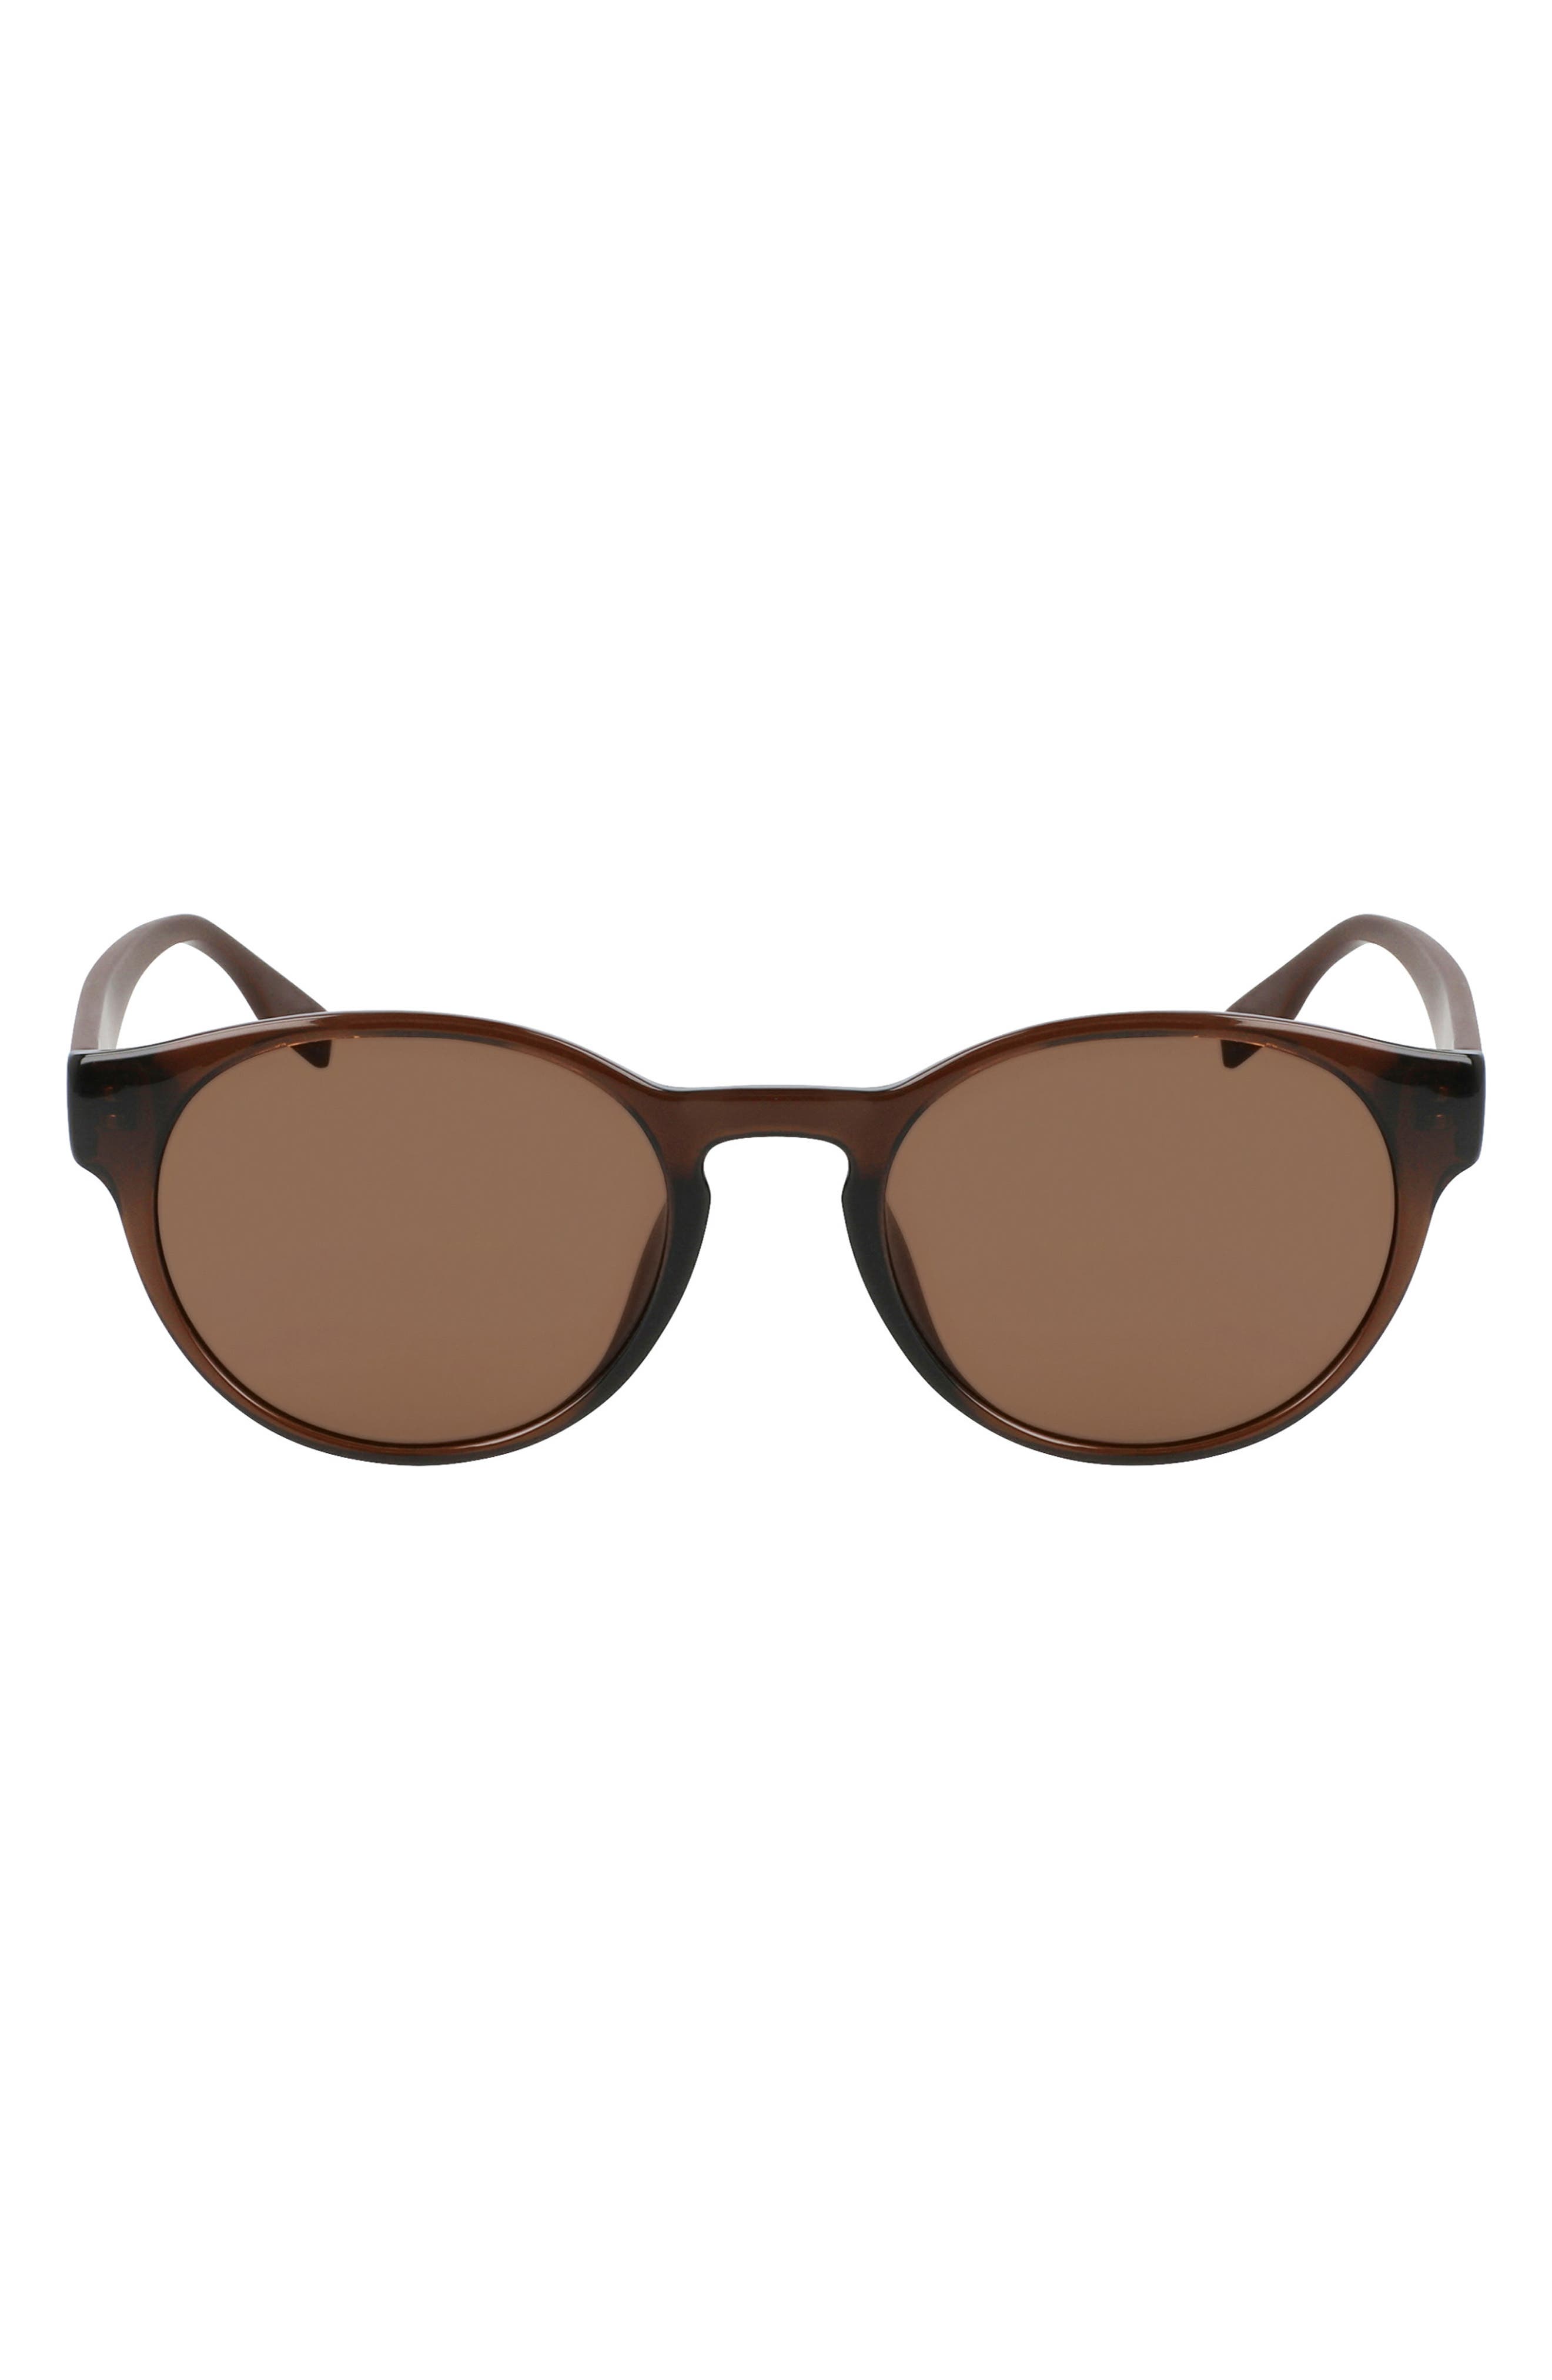 UPC 886895509213 product image for Converse Malden 51mm Round Sunglasses in Crystal Dark Root/Brown at Nordstrom | upcitemdb.com